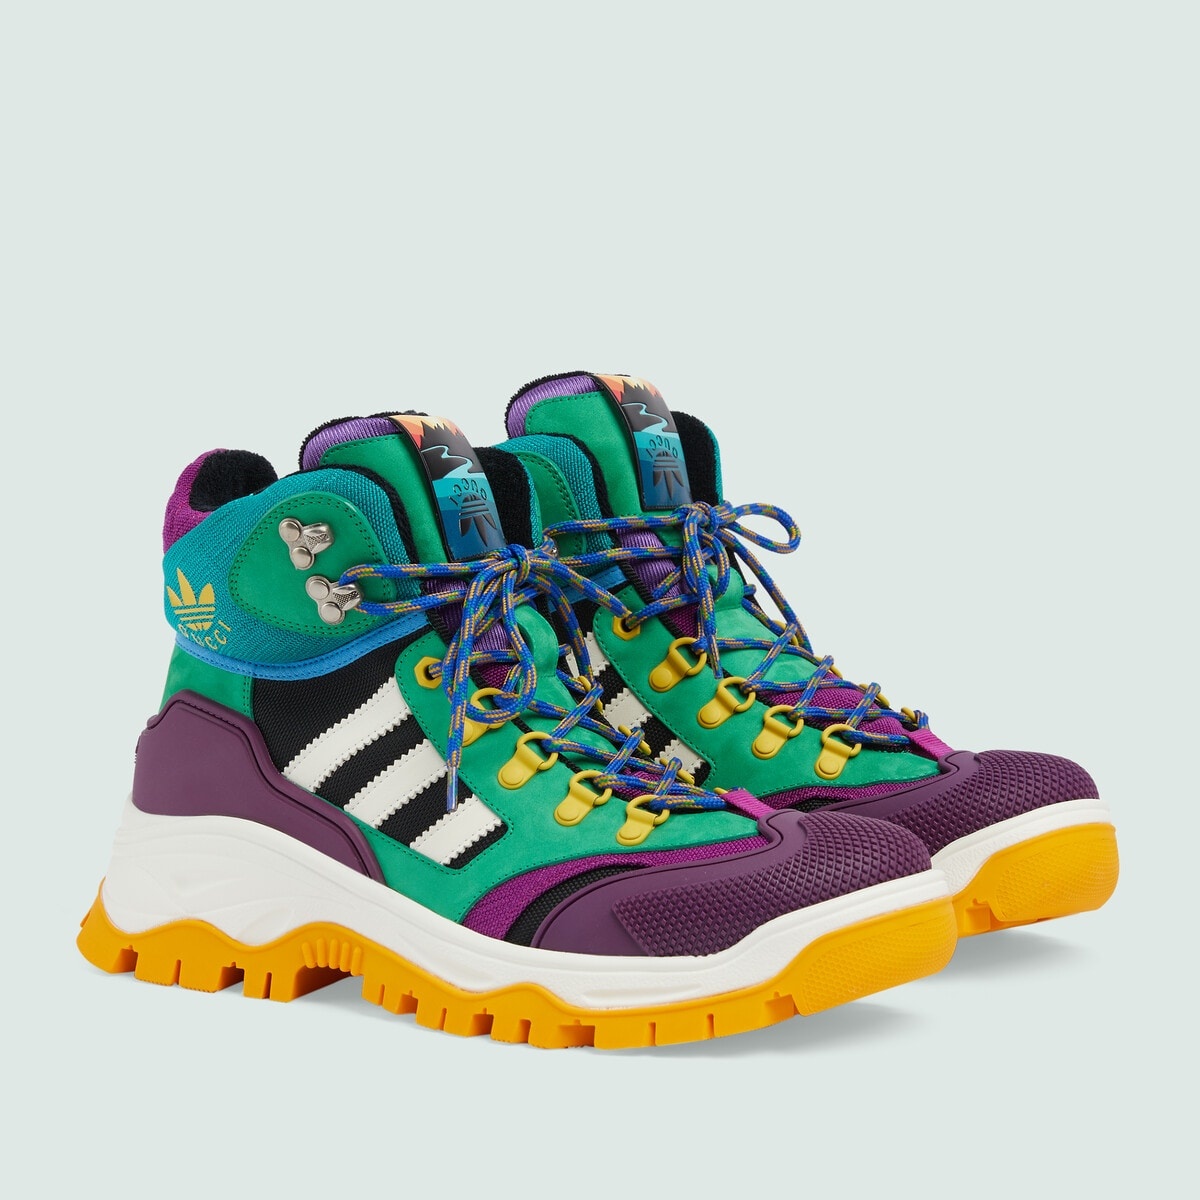 adidas x Gucci men's lace up boot - 2